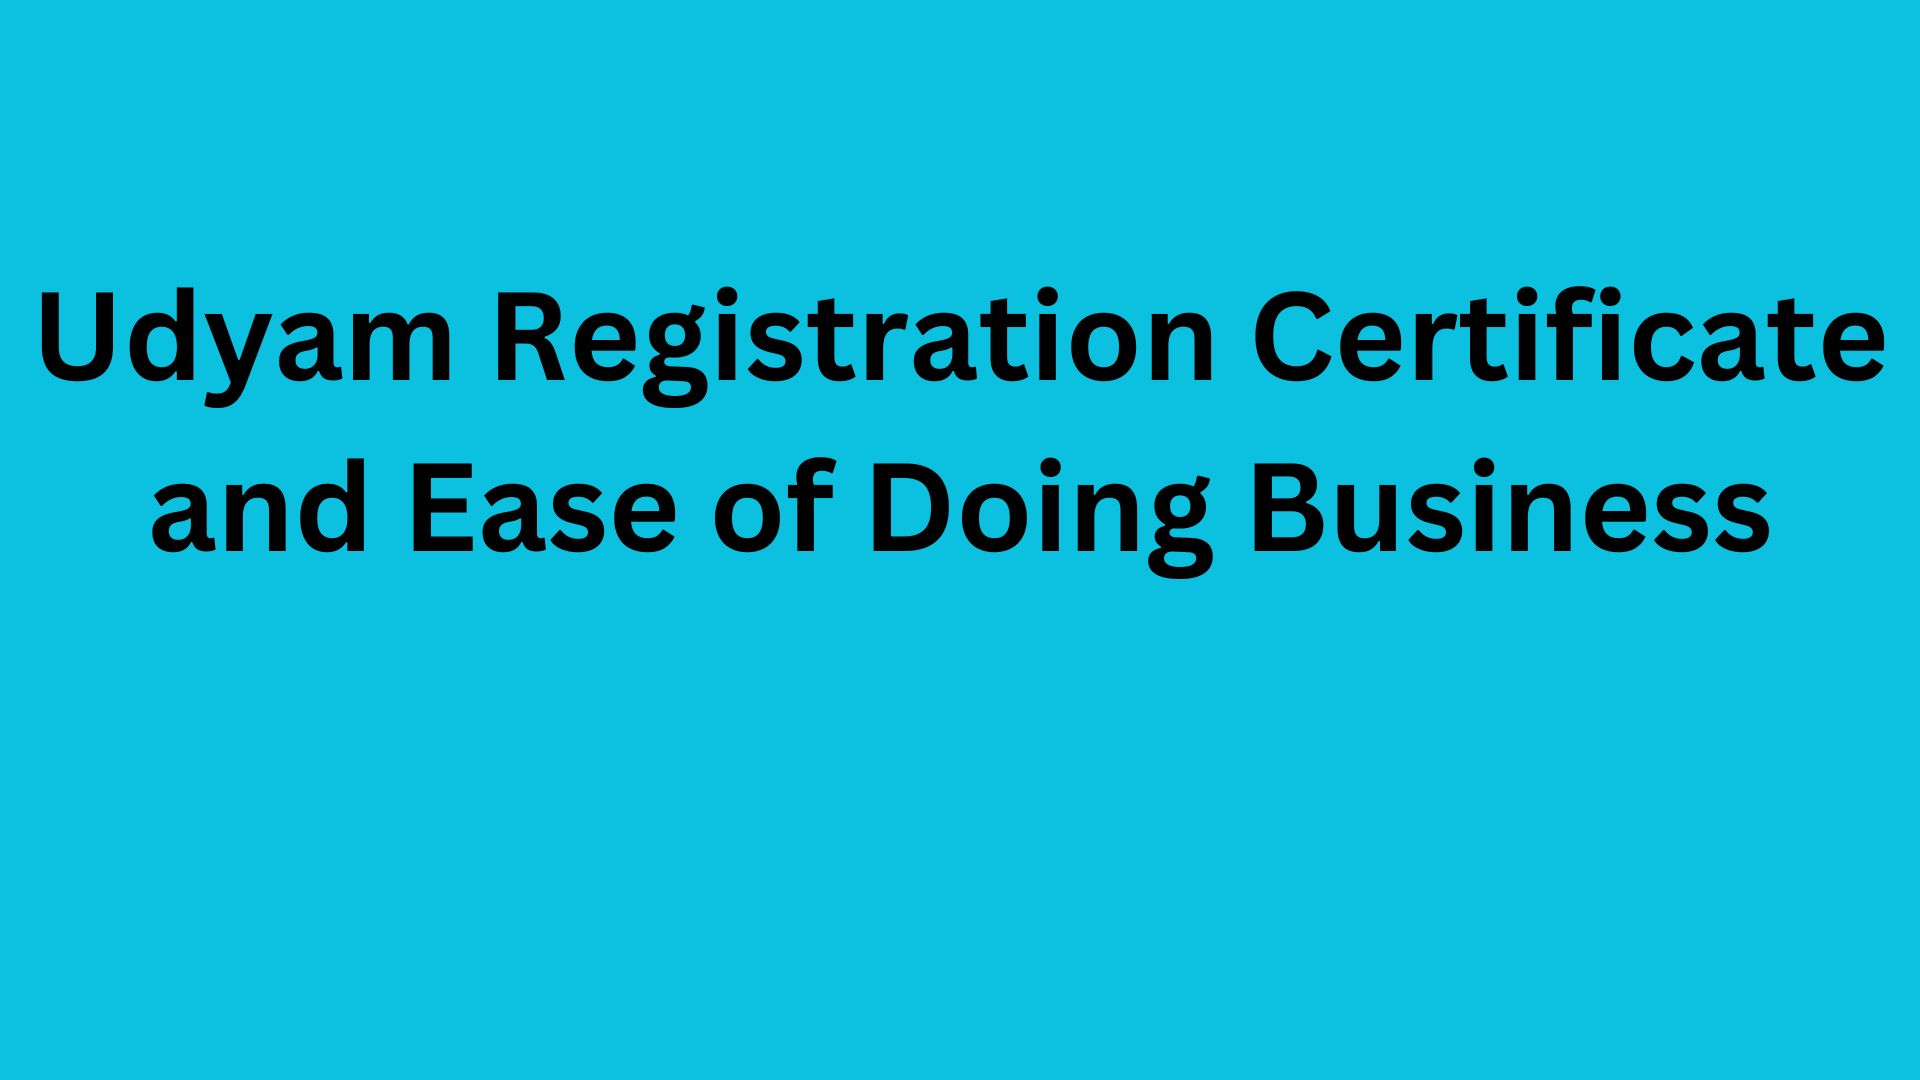 Udyam Registration Certificate and Ease of Doing Business